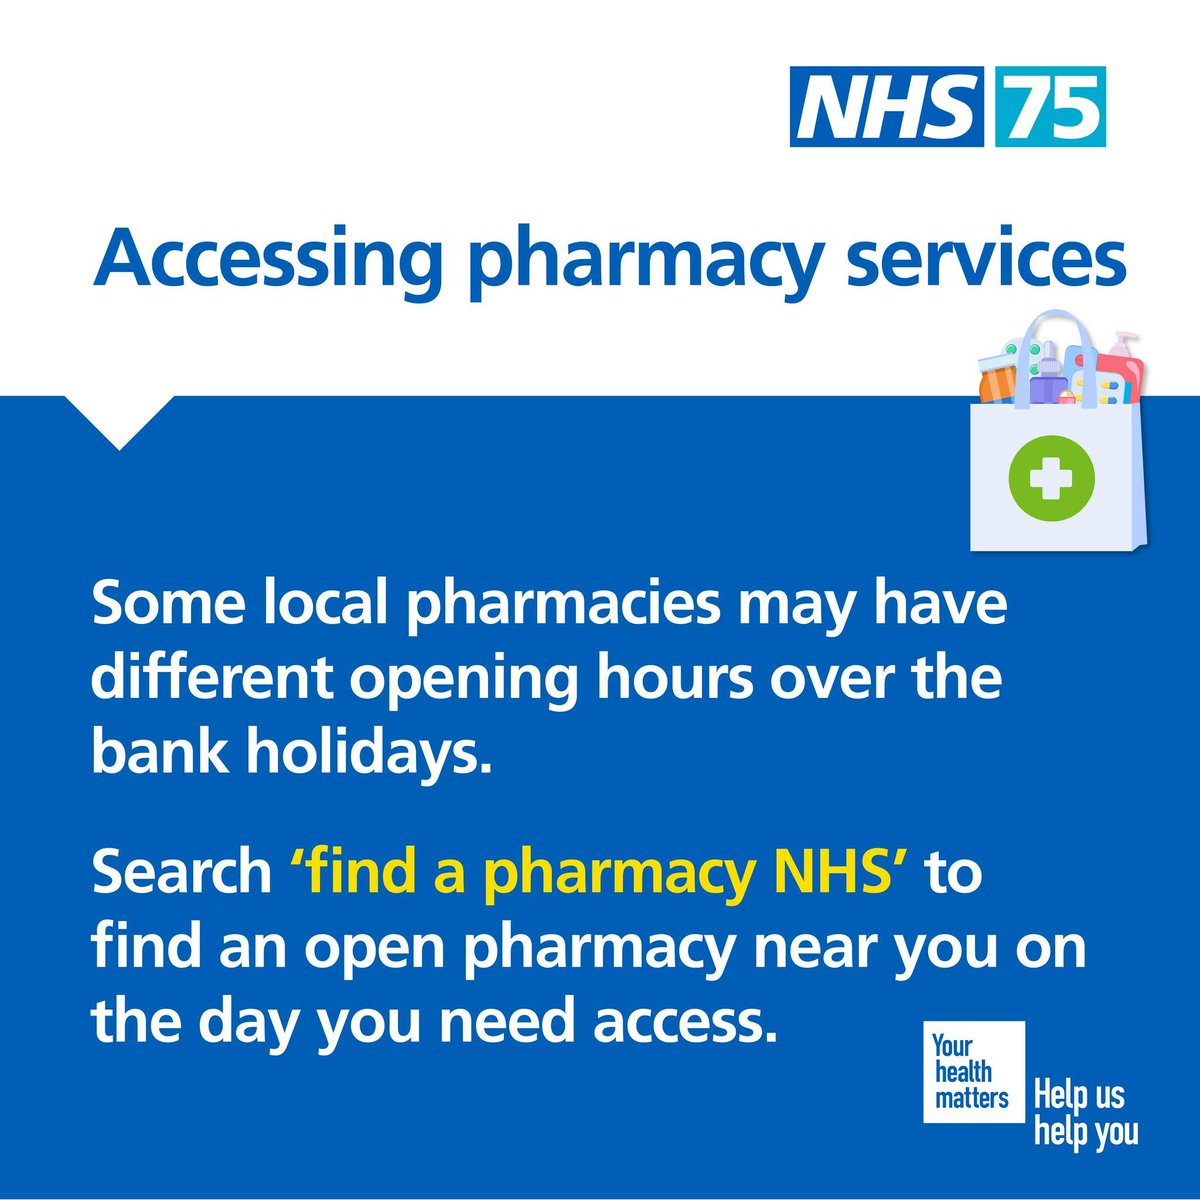 This bank holiday weekend, some pharmacies might have different opening hours. 🕒 Search ‘Find a pharmacy NHS’ to find an open pharmacy near you. #NHS #HereToHelp #BankHoliday